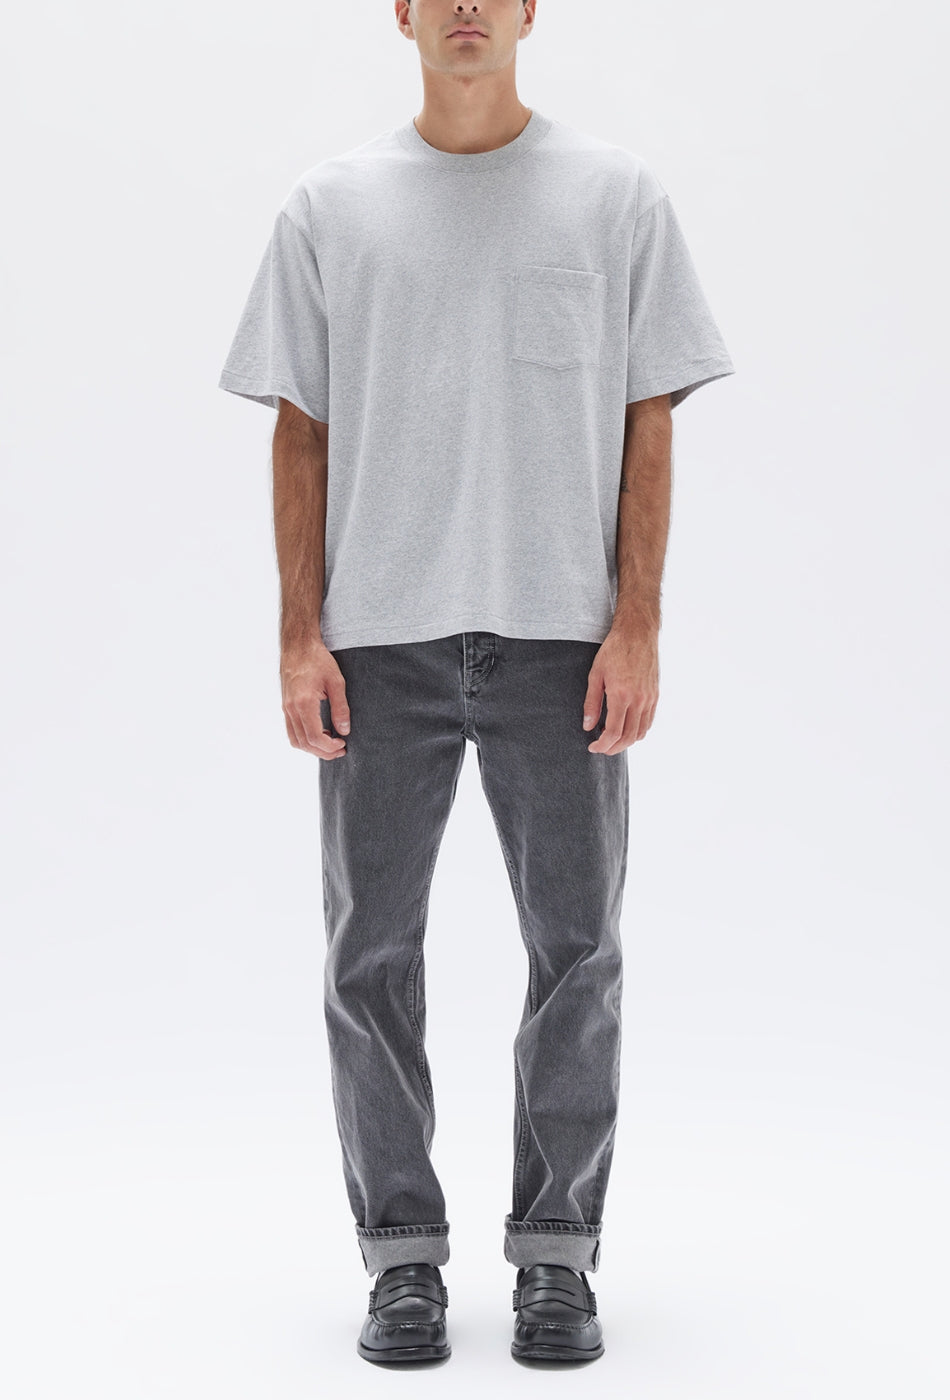 Lucas Cotton Short Sleeve Tee - Grey Marle-ASSEMBLY LABEL-P&K The General Store